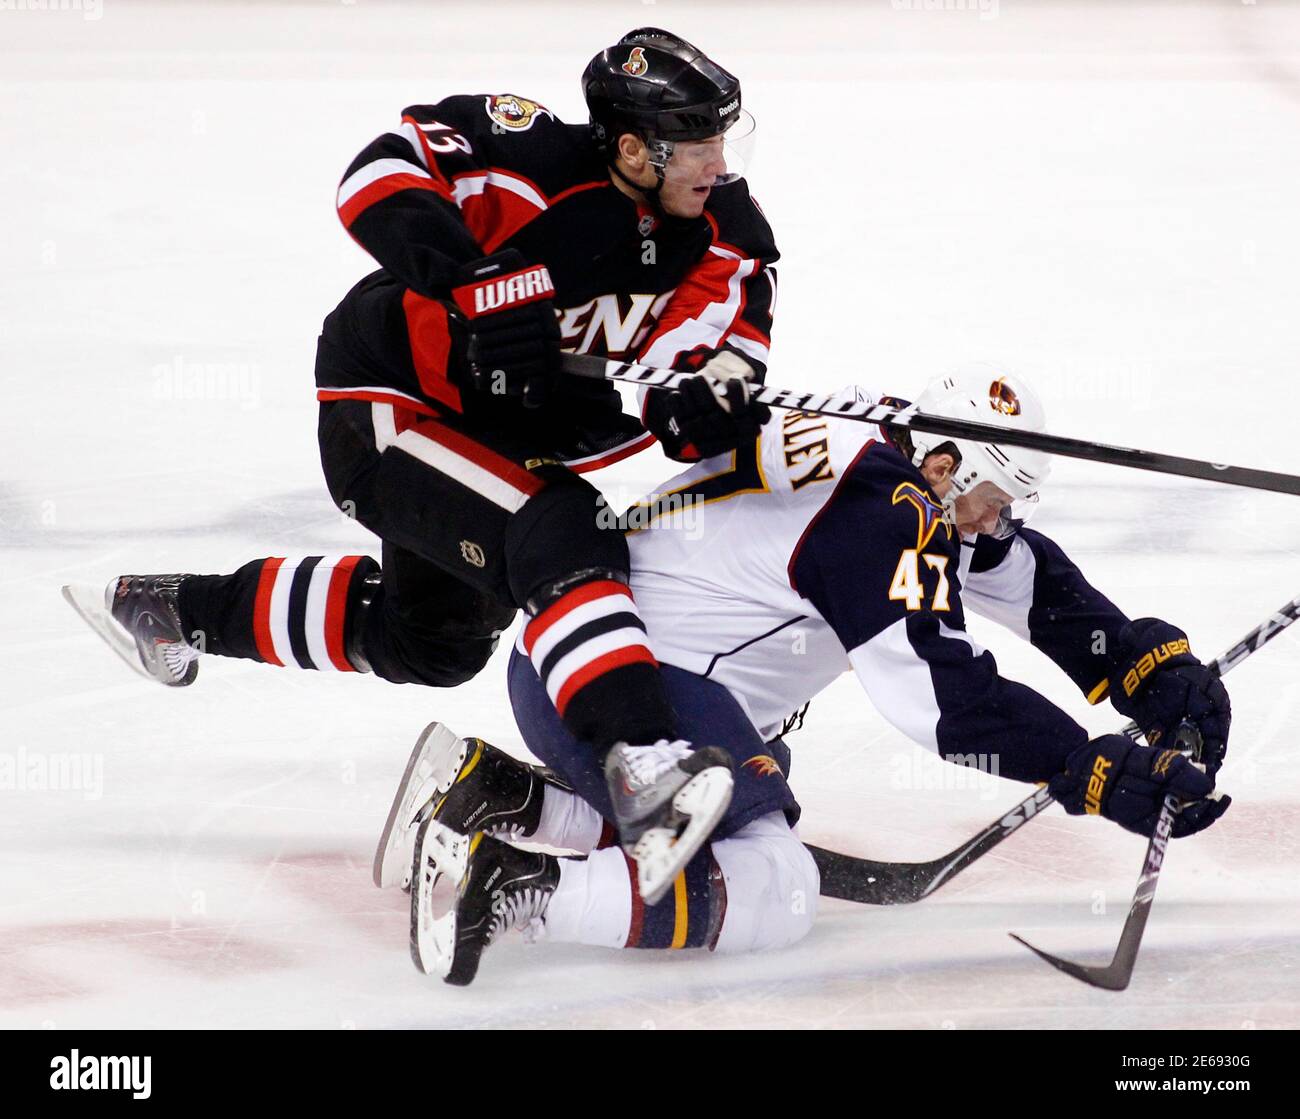 Ottawa Senators' Peter Regin (L) collides with Atlanta Thrashers' Rich Peverley during the first period of their NHL hockey game in Ottawa November 9, 2010.     REUTERS/Blair Gable     (CANADA - Tags: SPORT ICE HOCKEY) Stock Photo